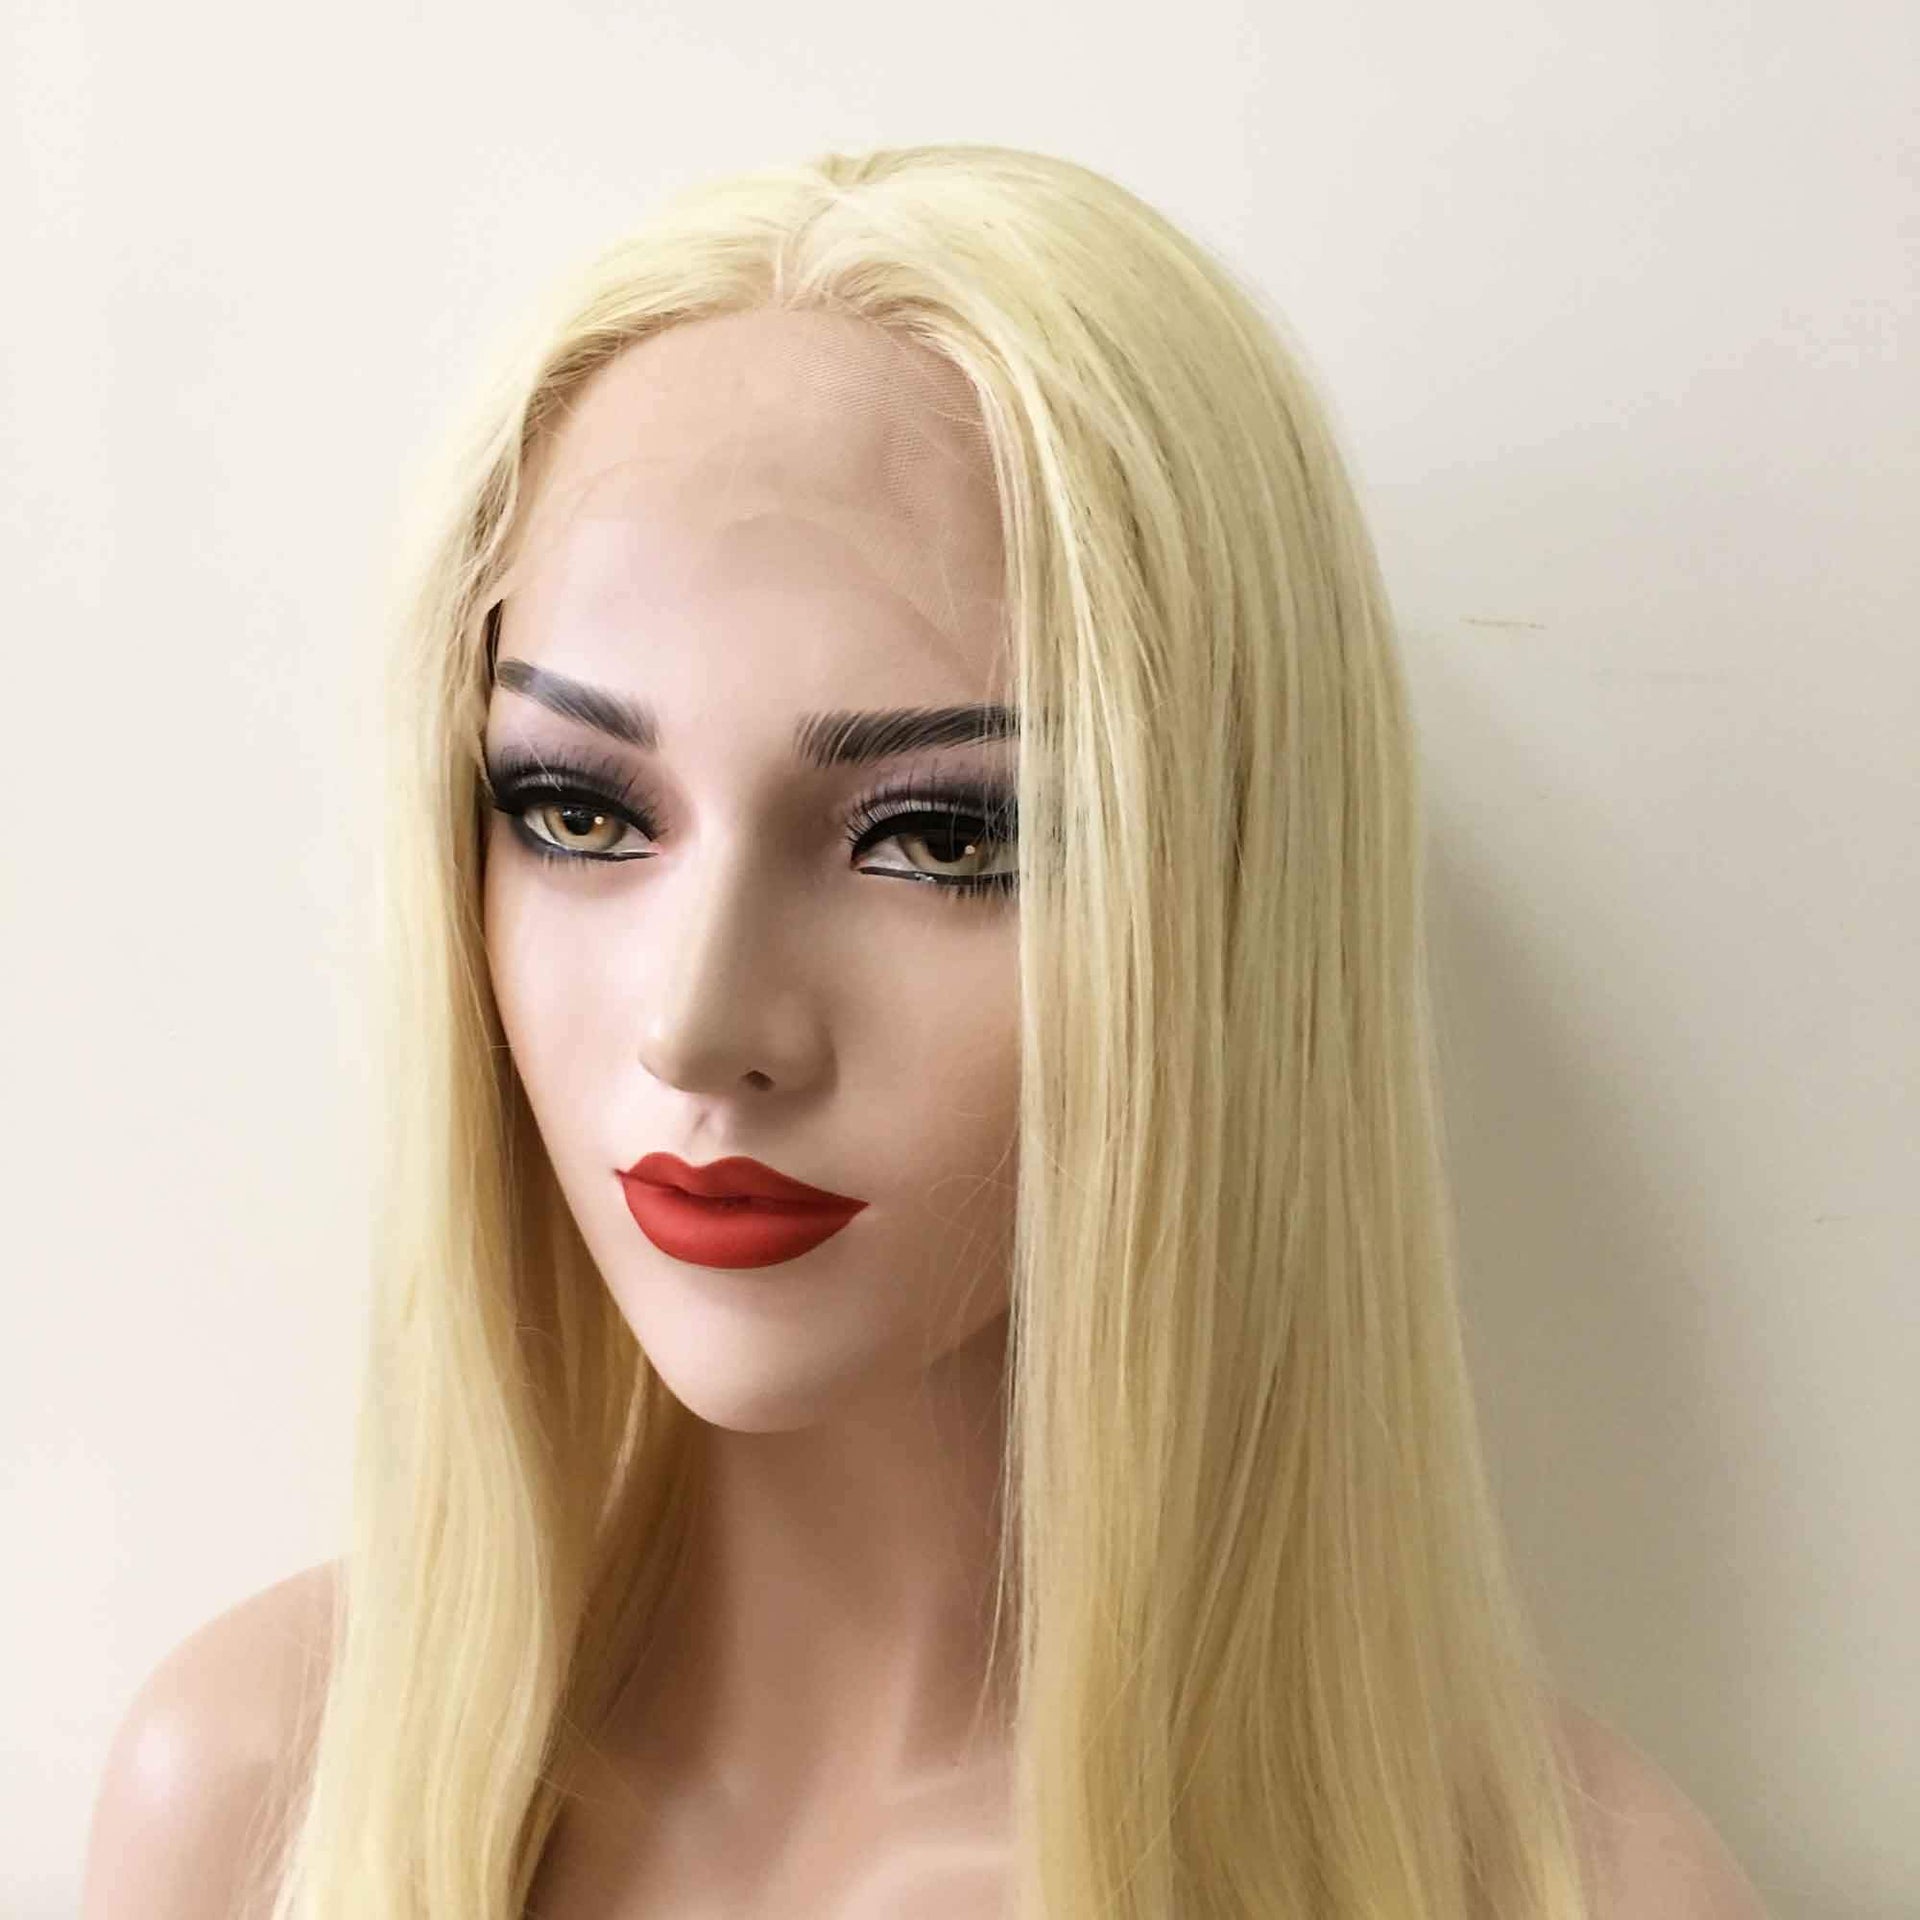 nevermindyrhead Women Lace Front Light Blonde Middle Part Long Soft Straight Hair Wig